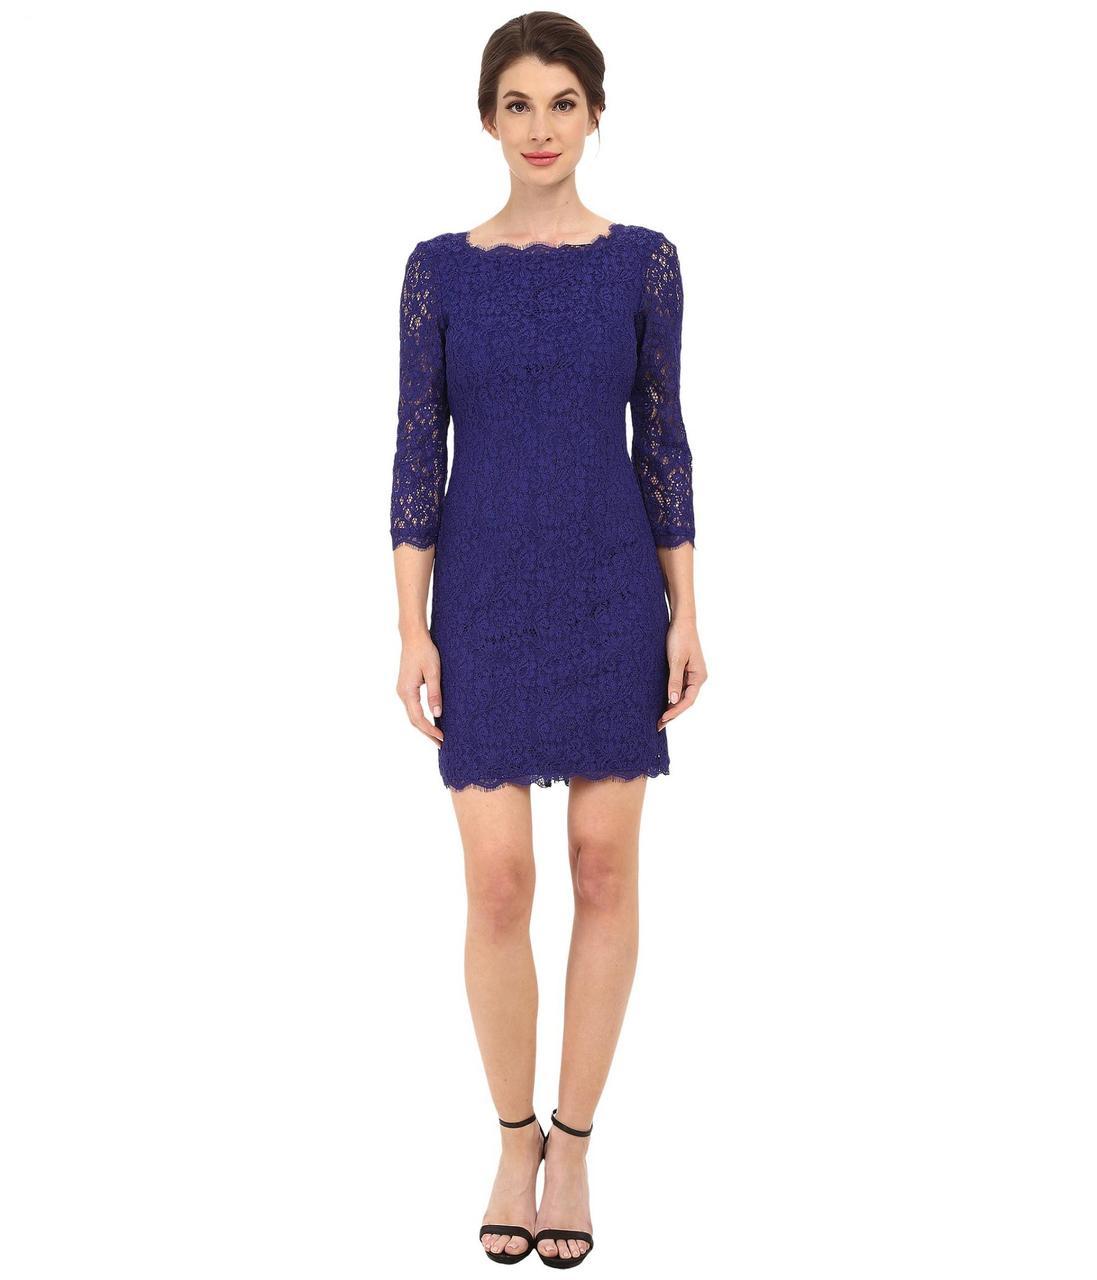 Adrianna Papell - Quarter Length Sleeve Lace Dress 41864780 in Purple